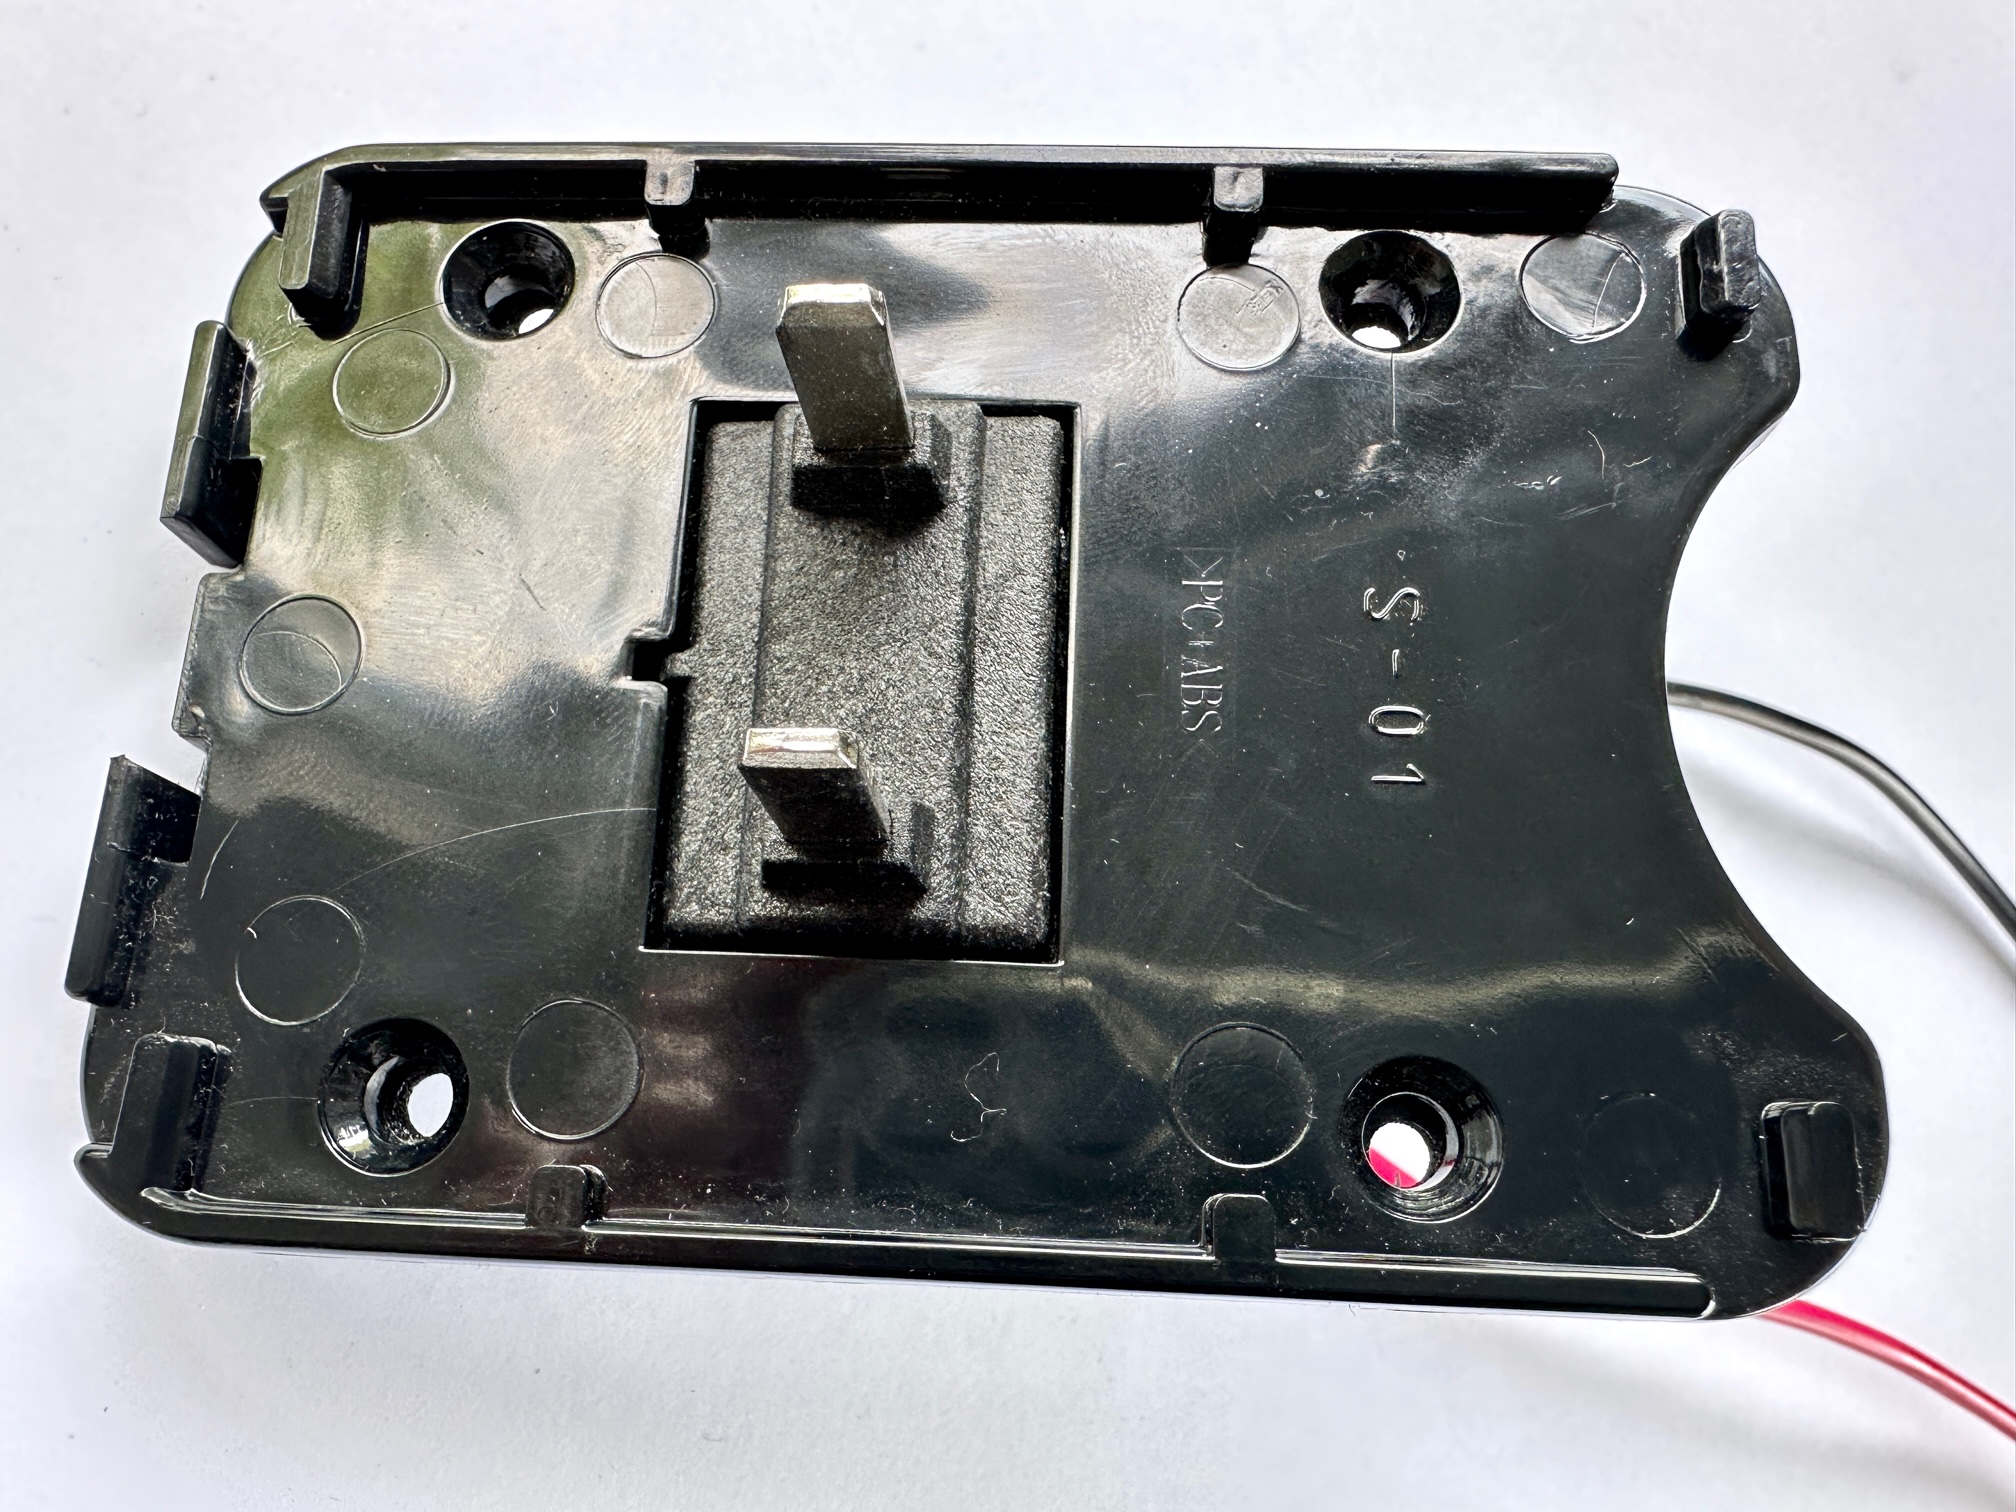 E-bike battery base plate with battery contacts